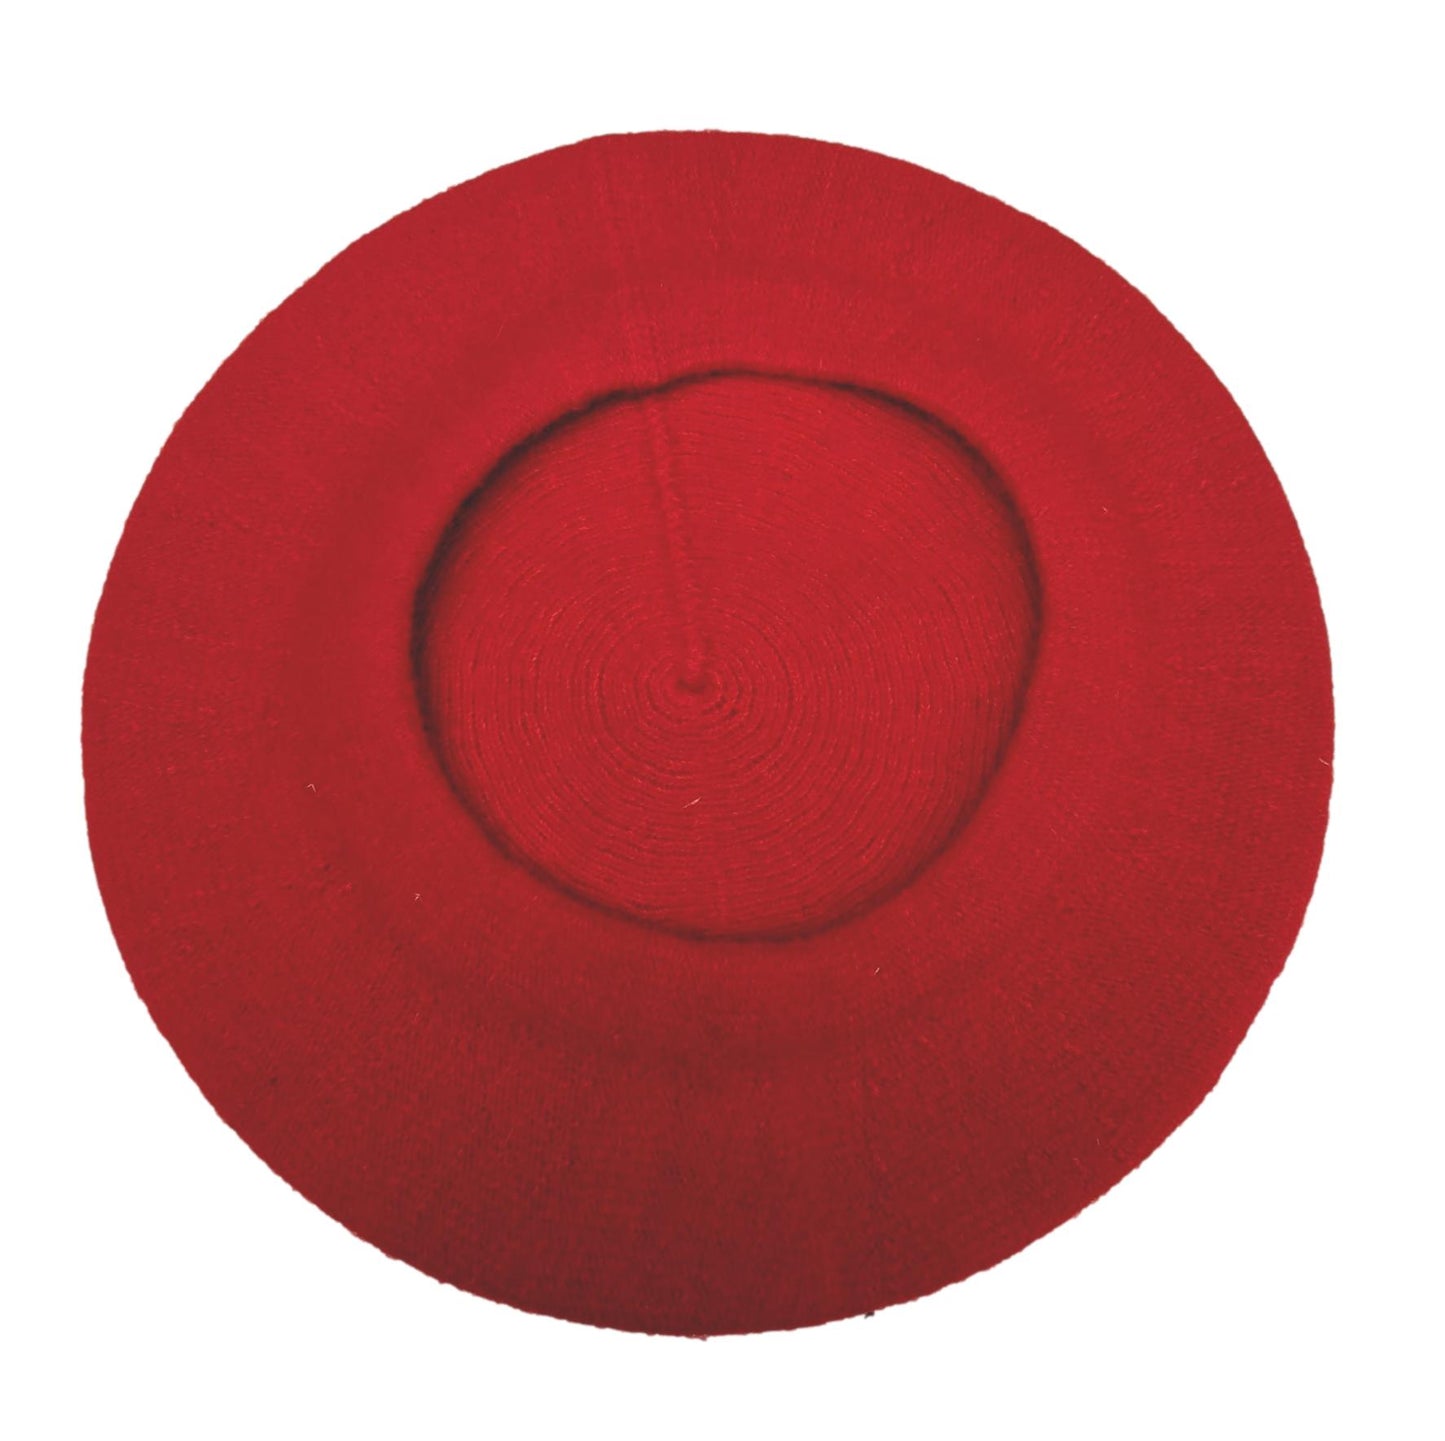 Beret - in Red